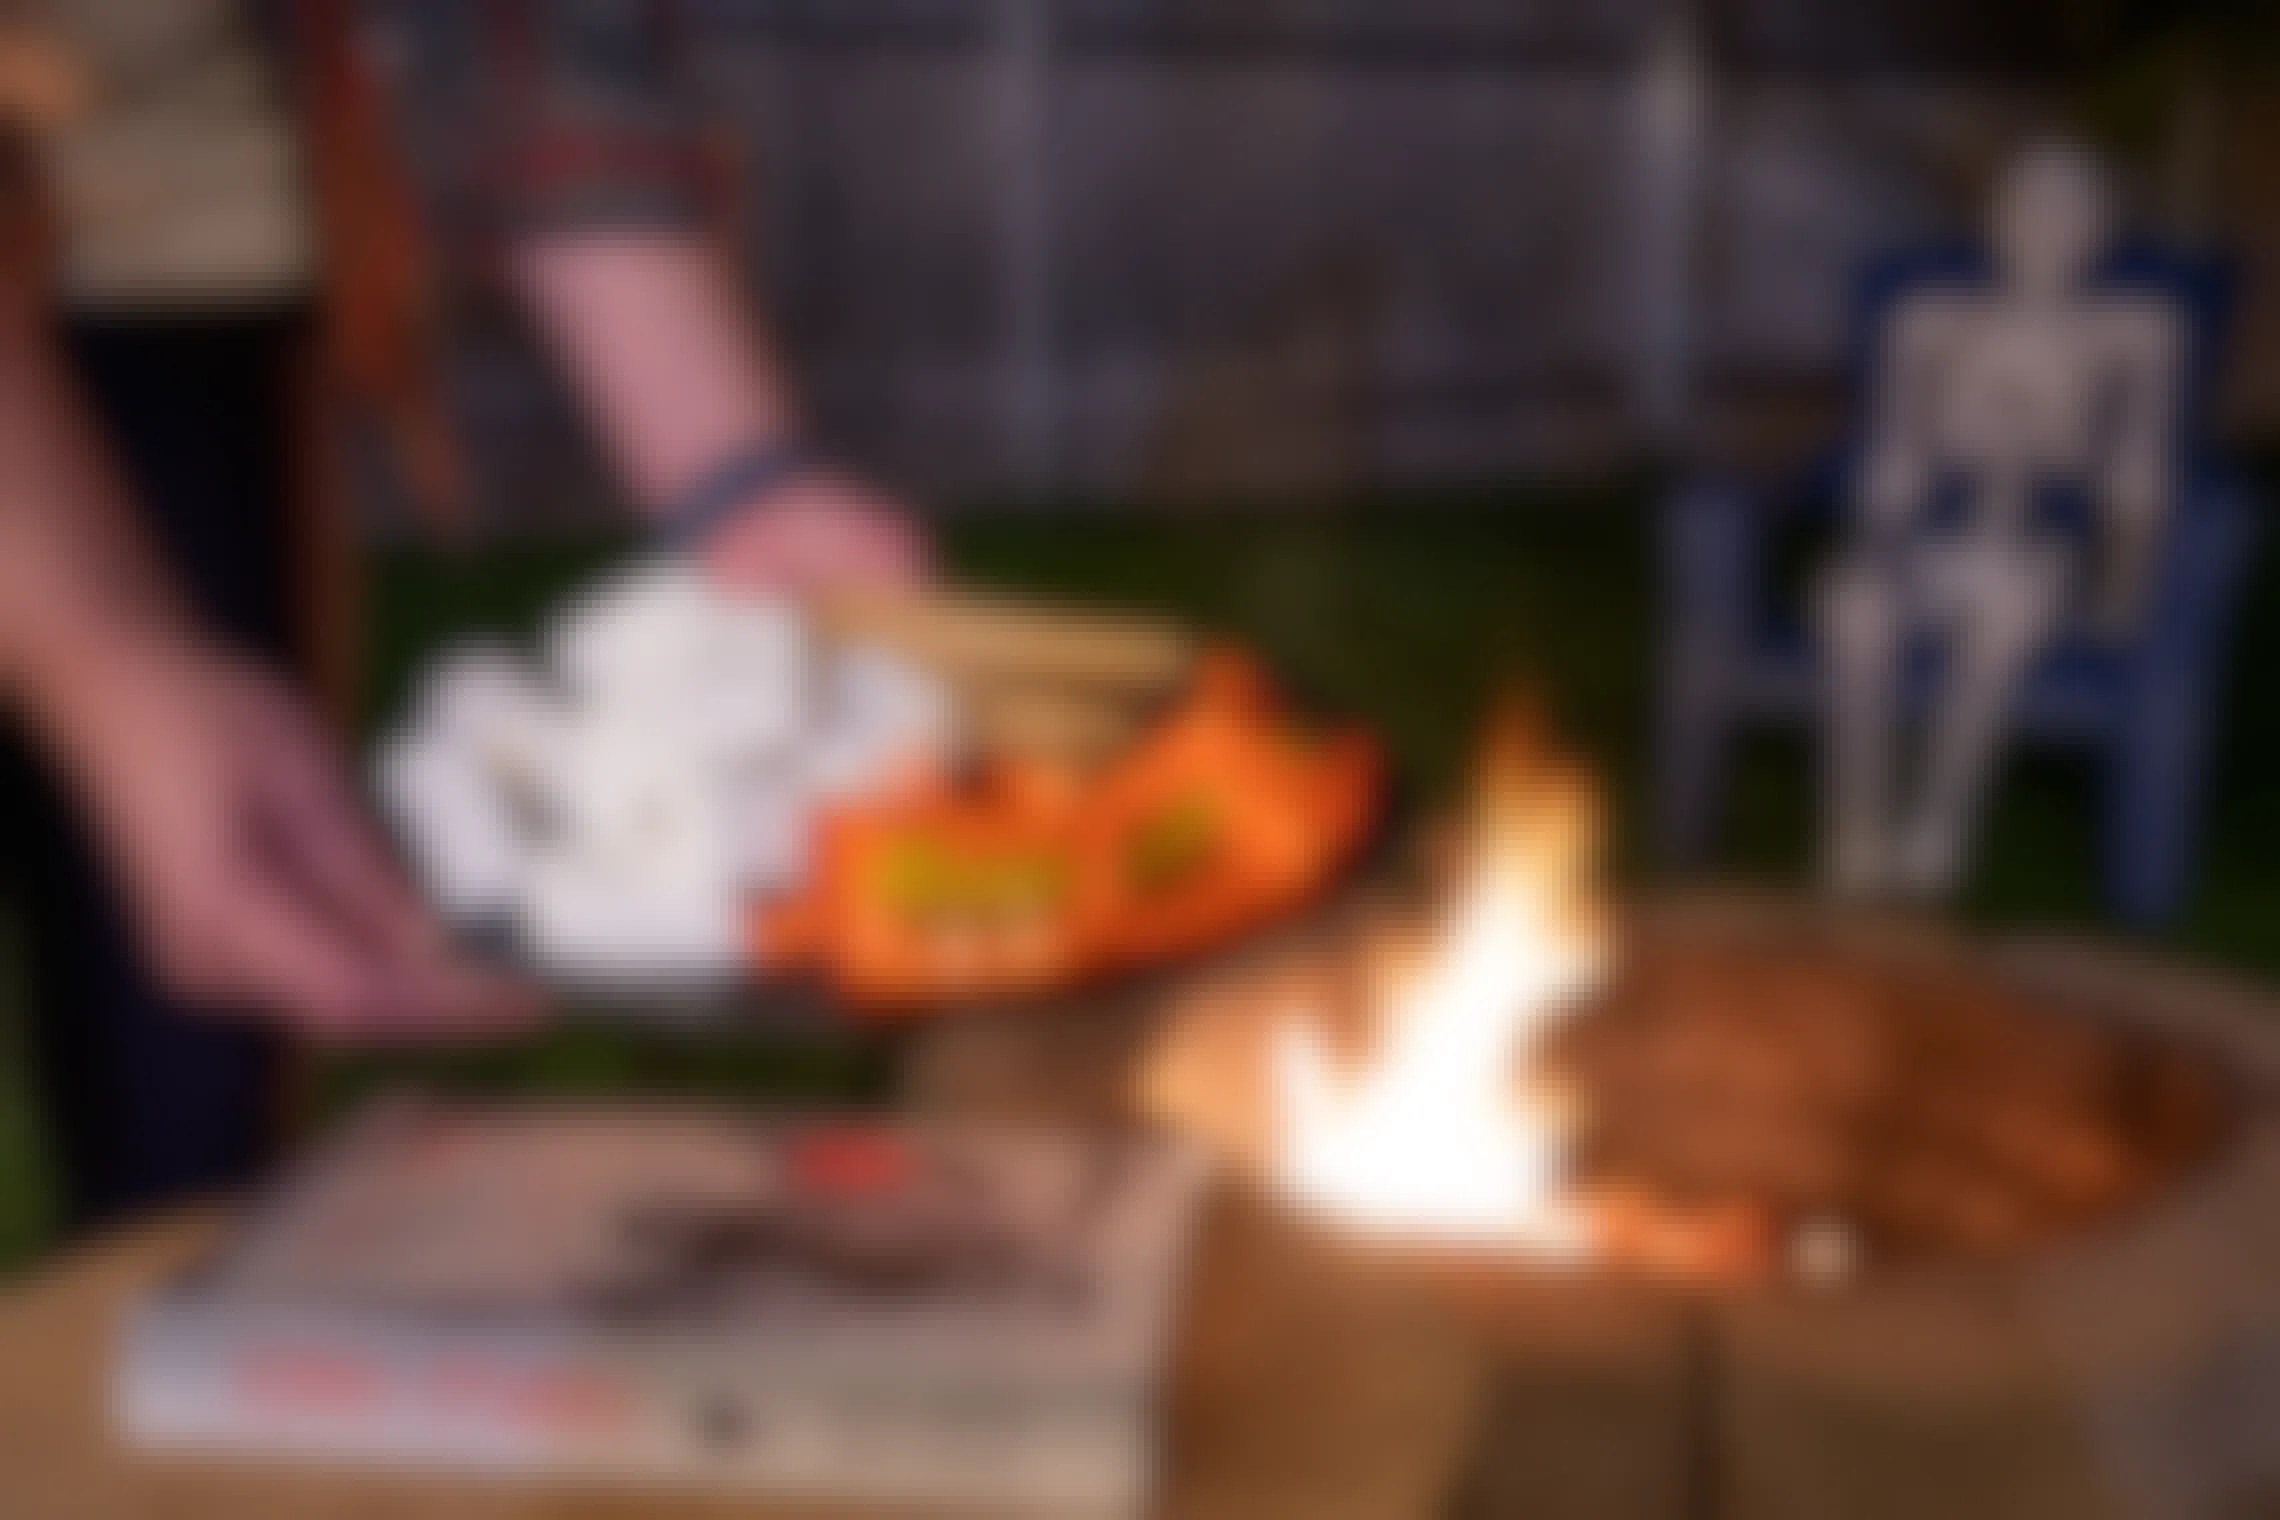 A person holding a plate of graham crackers, chocolate Reese's peanut butter cups, and marshmallows next to a fire pit and Scary Stories books, with a plastic skeleton sitting on a chair in the background..